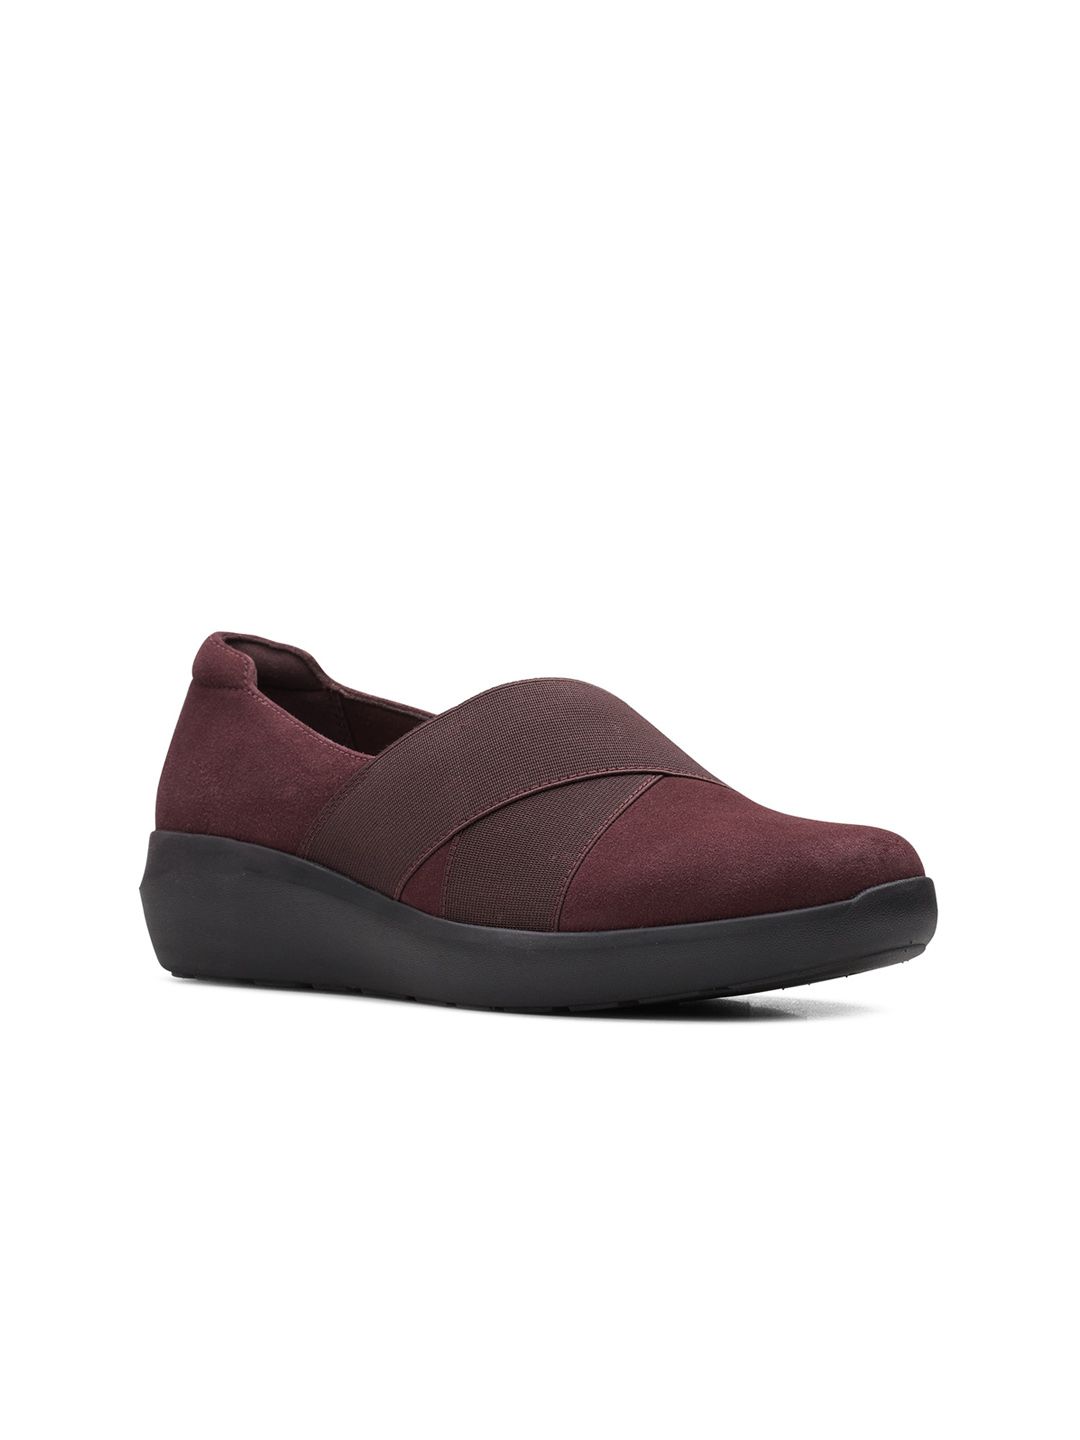 Clarks Women Burgundy Leather Slip-On Sneakers Price in India